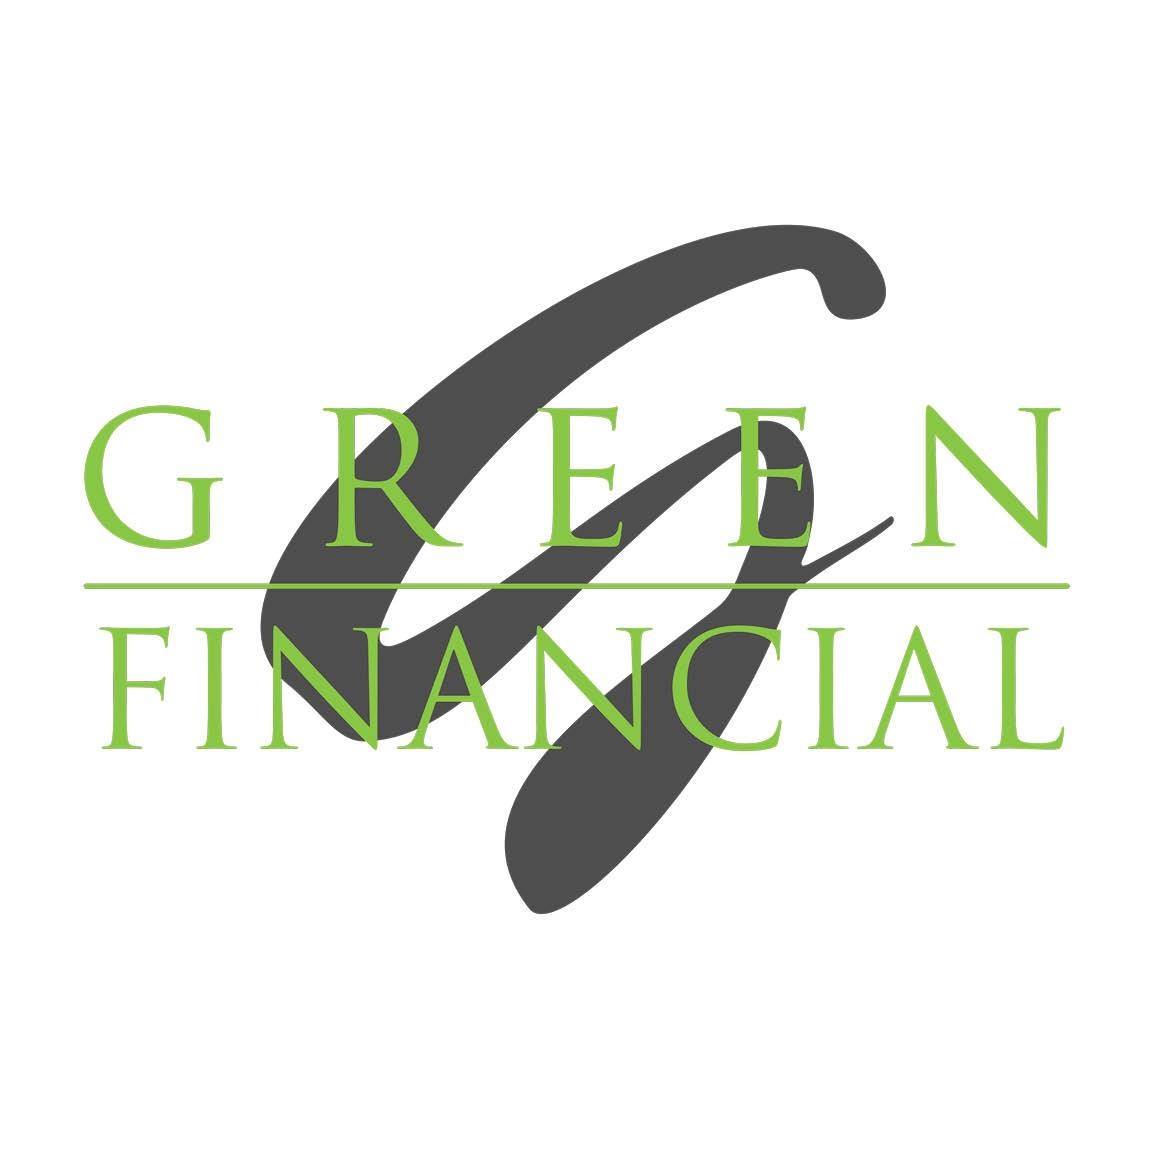 Business logo of Green Financial Resources Roger S. Green, MSFS, CFP